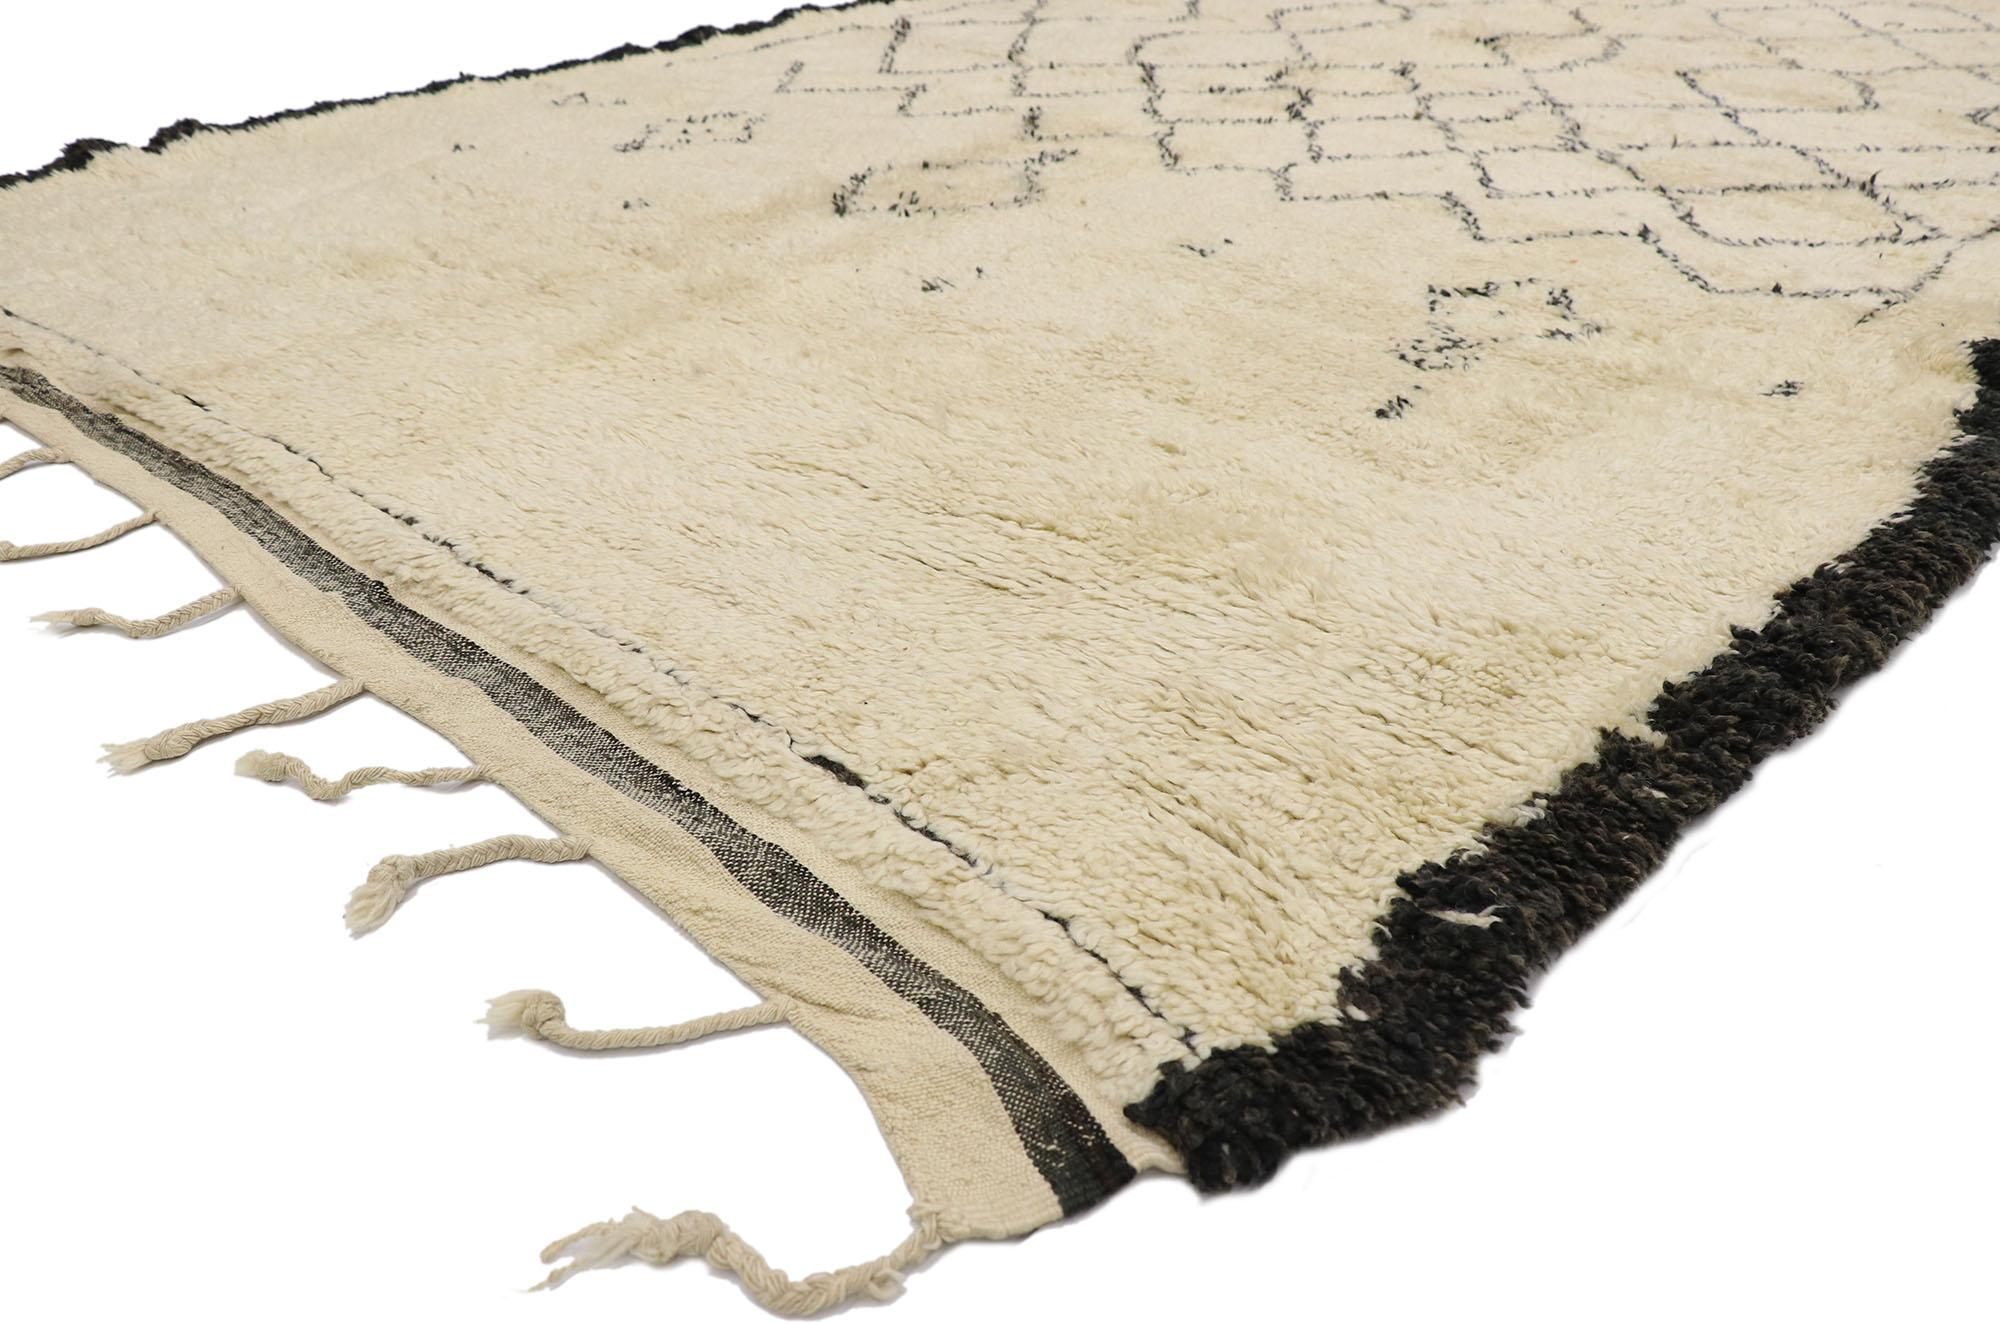 21376 Vintage Berber Beni Ourain Moroccan rug with Mid-Century Modern Style 07'00 x 11'00. With its simplicity, plush pile and Mid-Century Modern style, this hand knotted wool vintage Berber Beni Ourain Moroccan rug is a captivating vision of woven